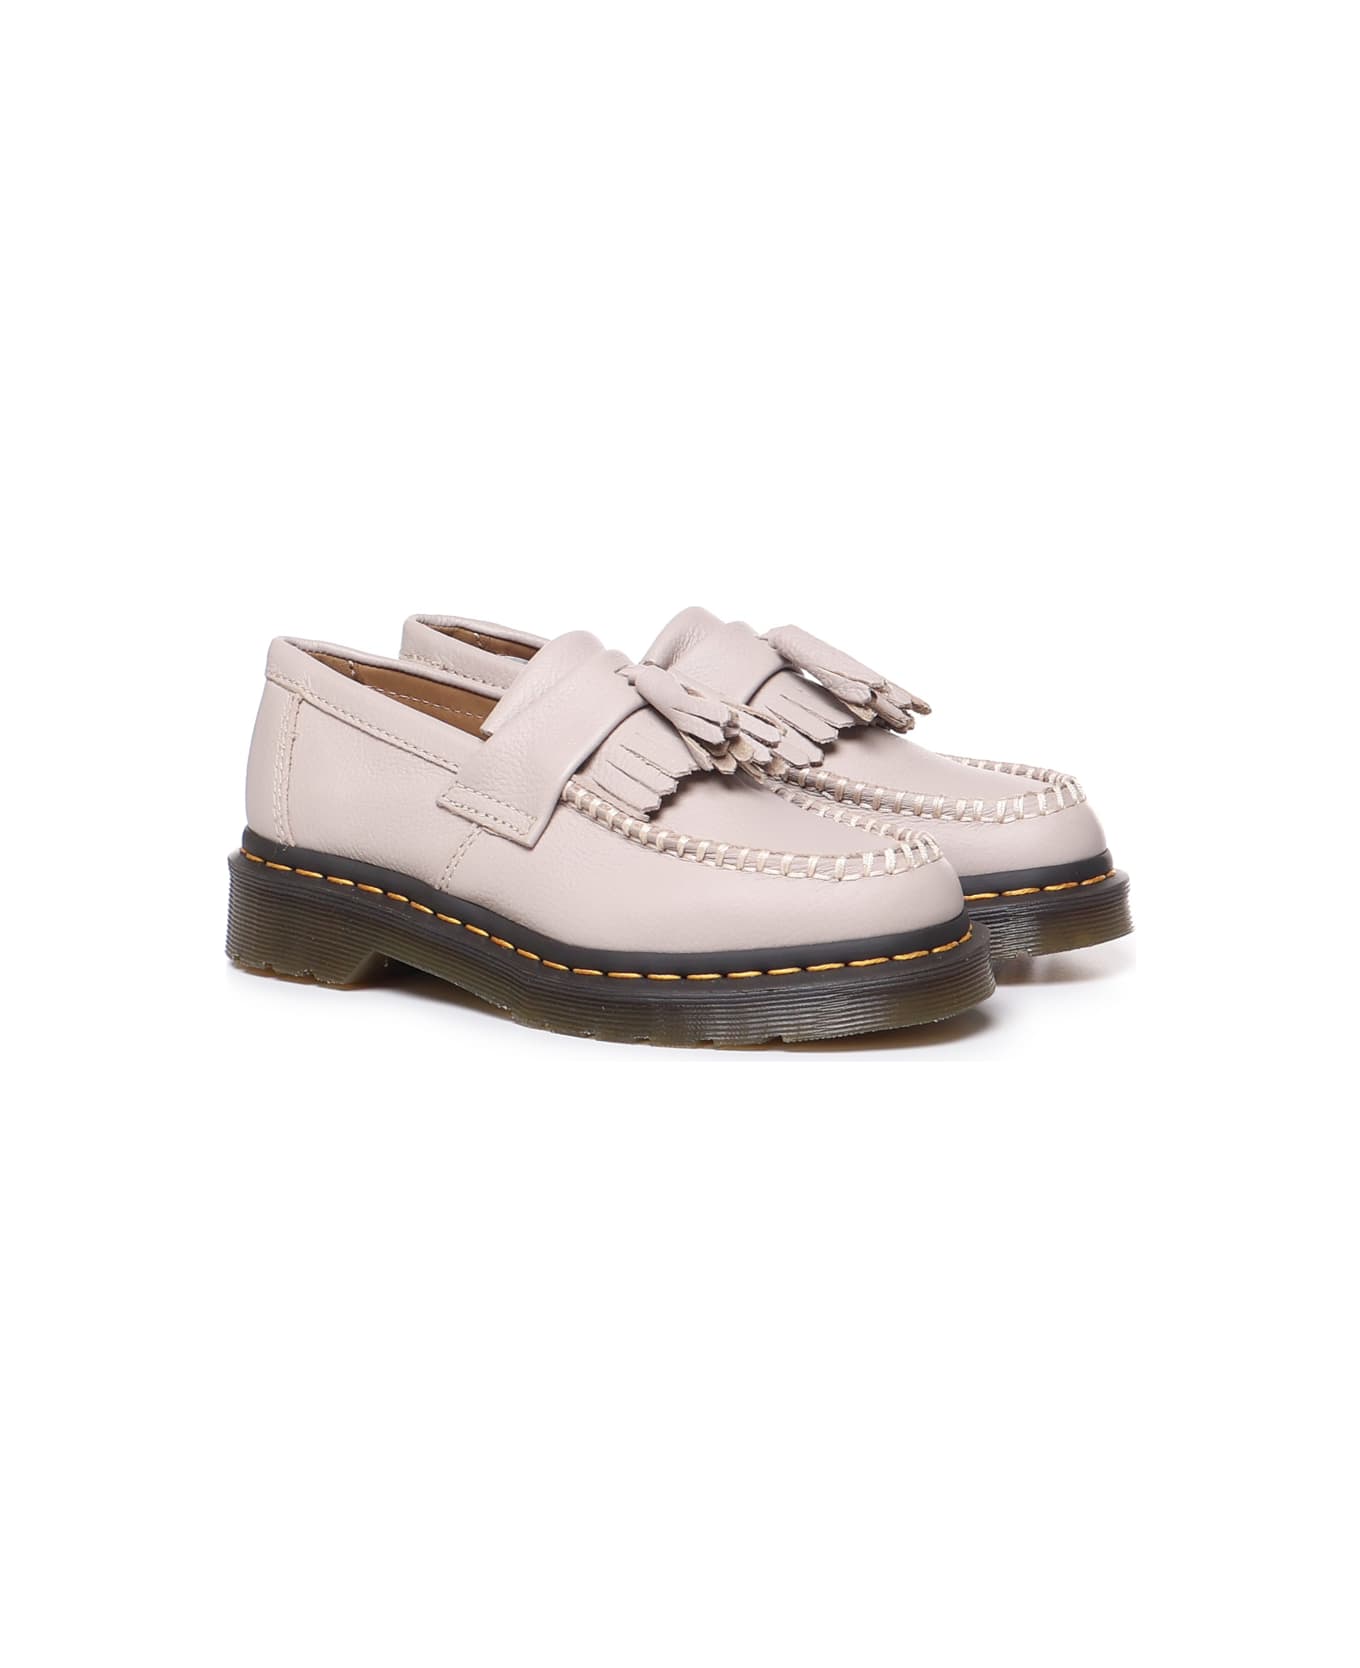 Dr. Martens Adrian Moccasins With Tassels In Virginia Leather - White